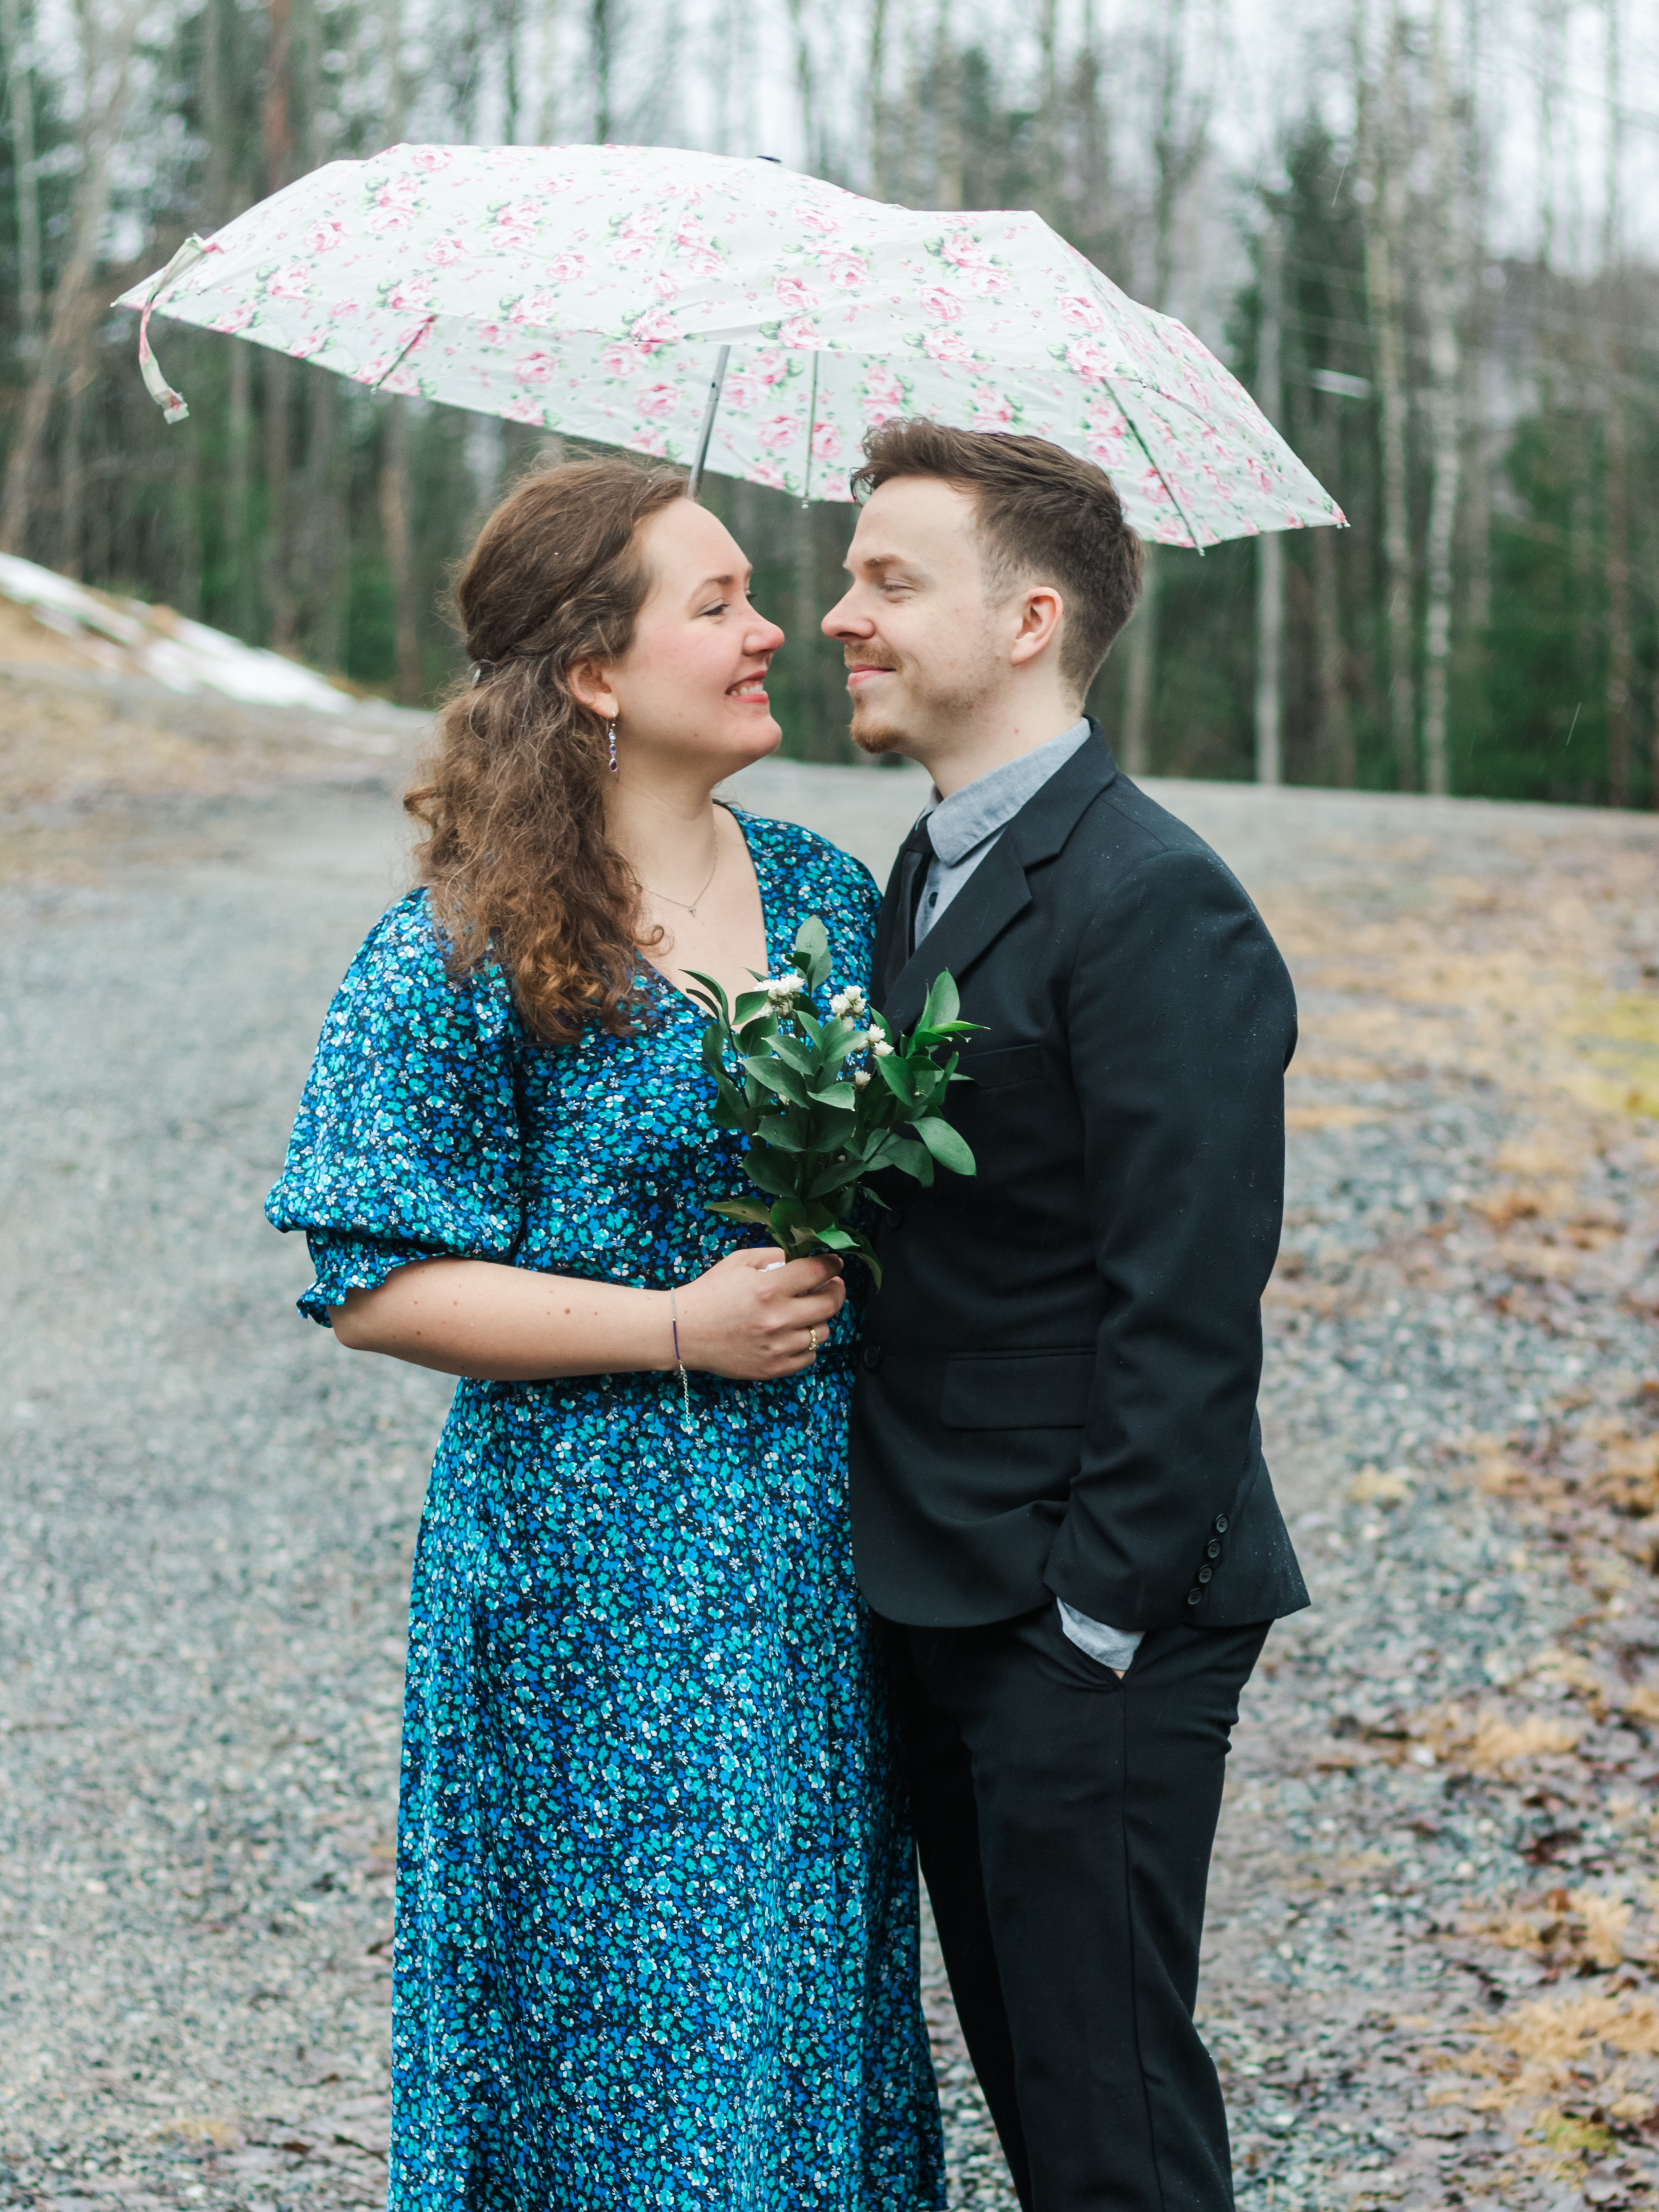 Couples smiling at each other under umbrella, couples photographer in mountains